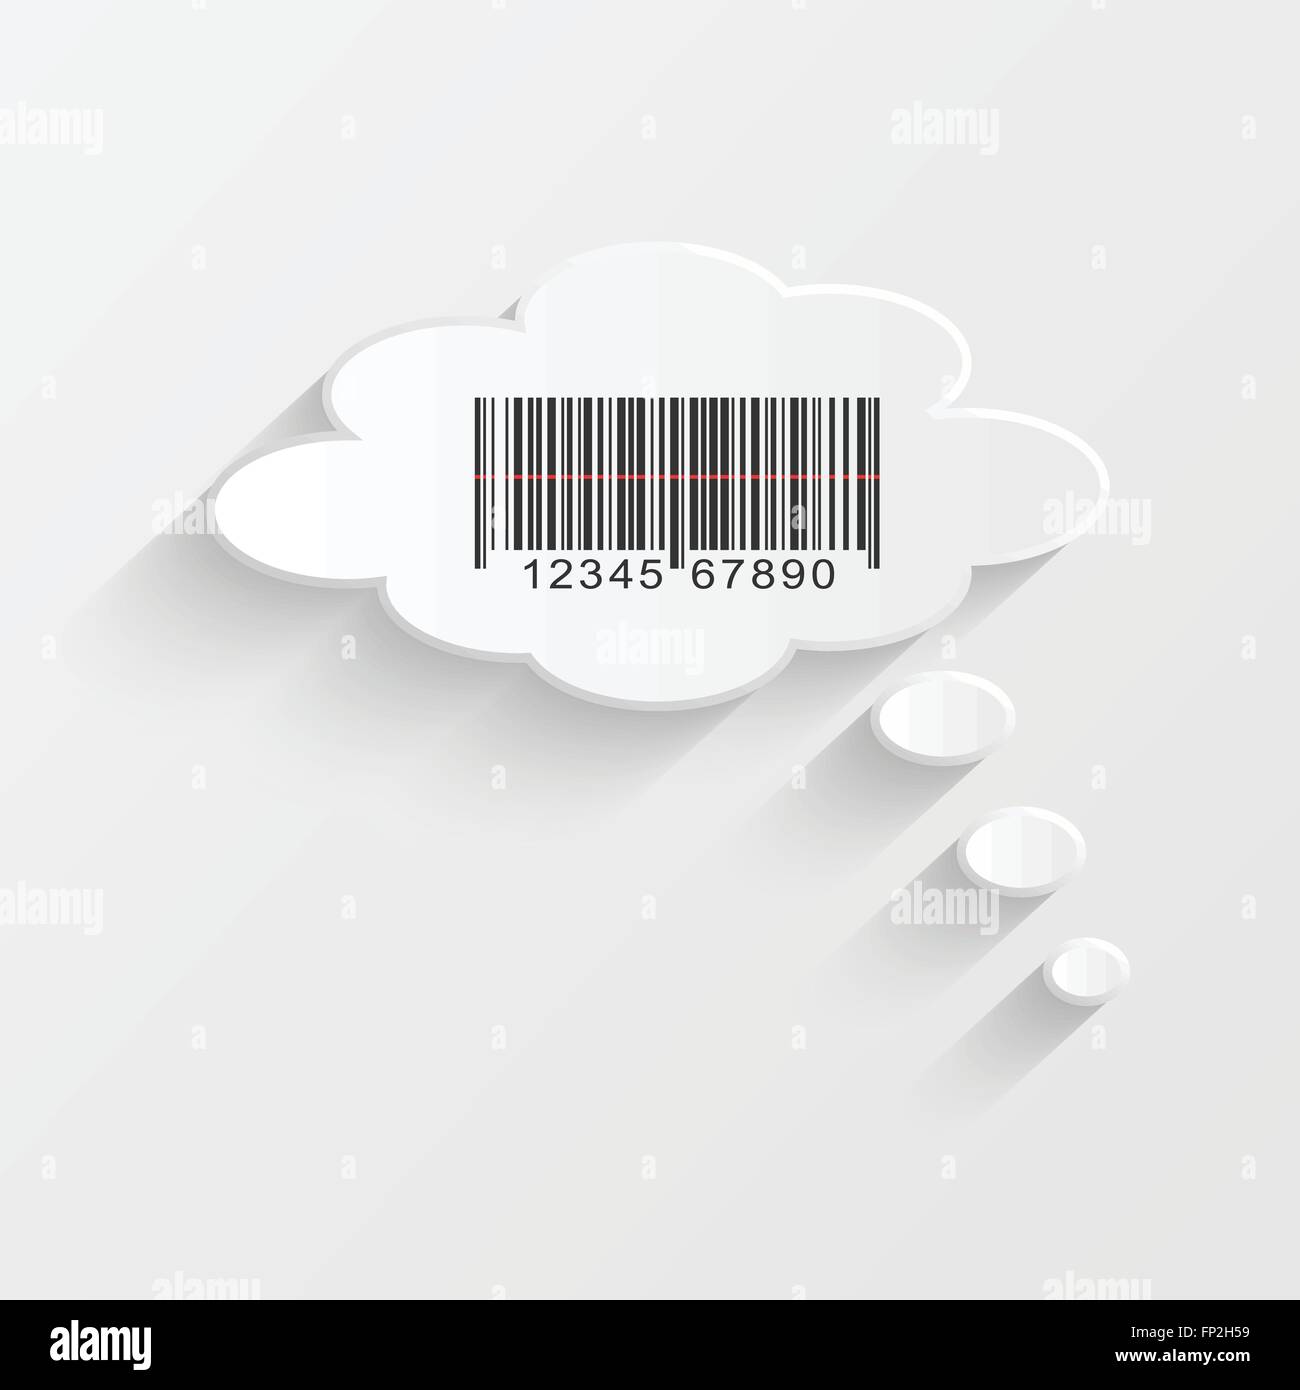 Illustration of a barcode inside of a chat bubble. Stock Vector